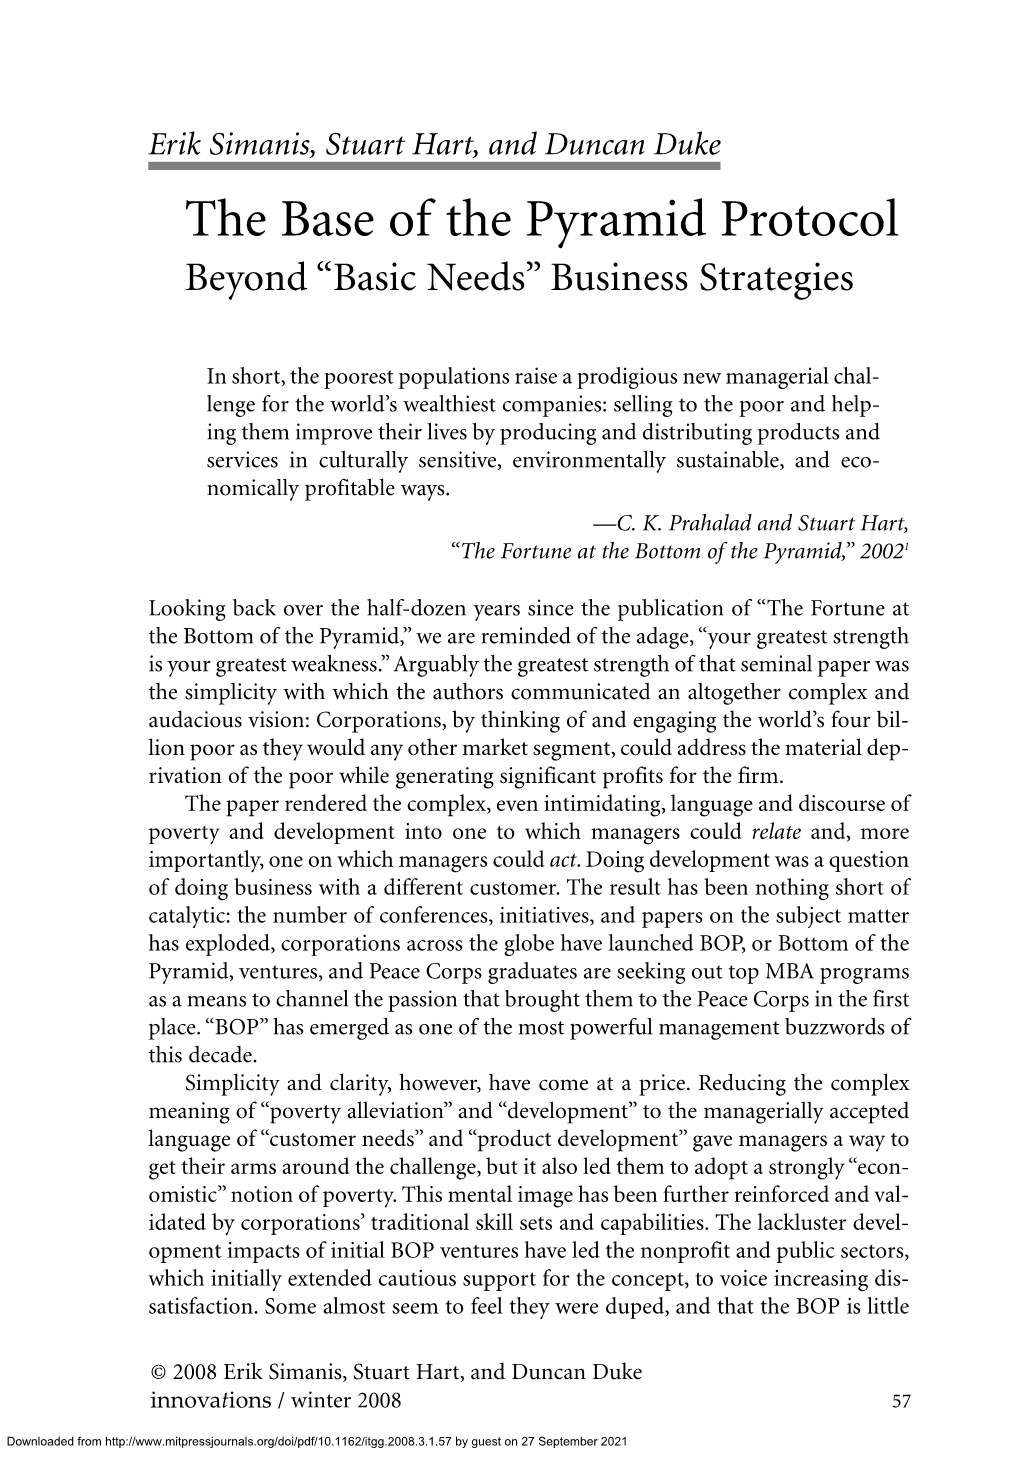 The Base of the Pyramid Protocol Beyond “Basic Needs” Business Strategies